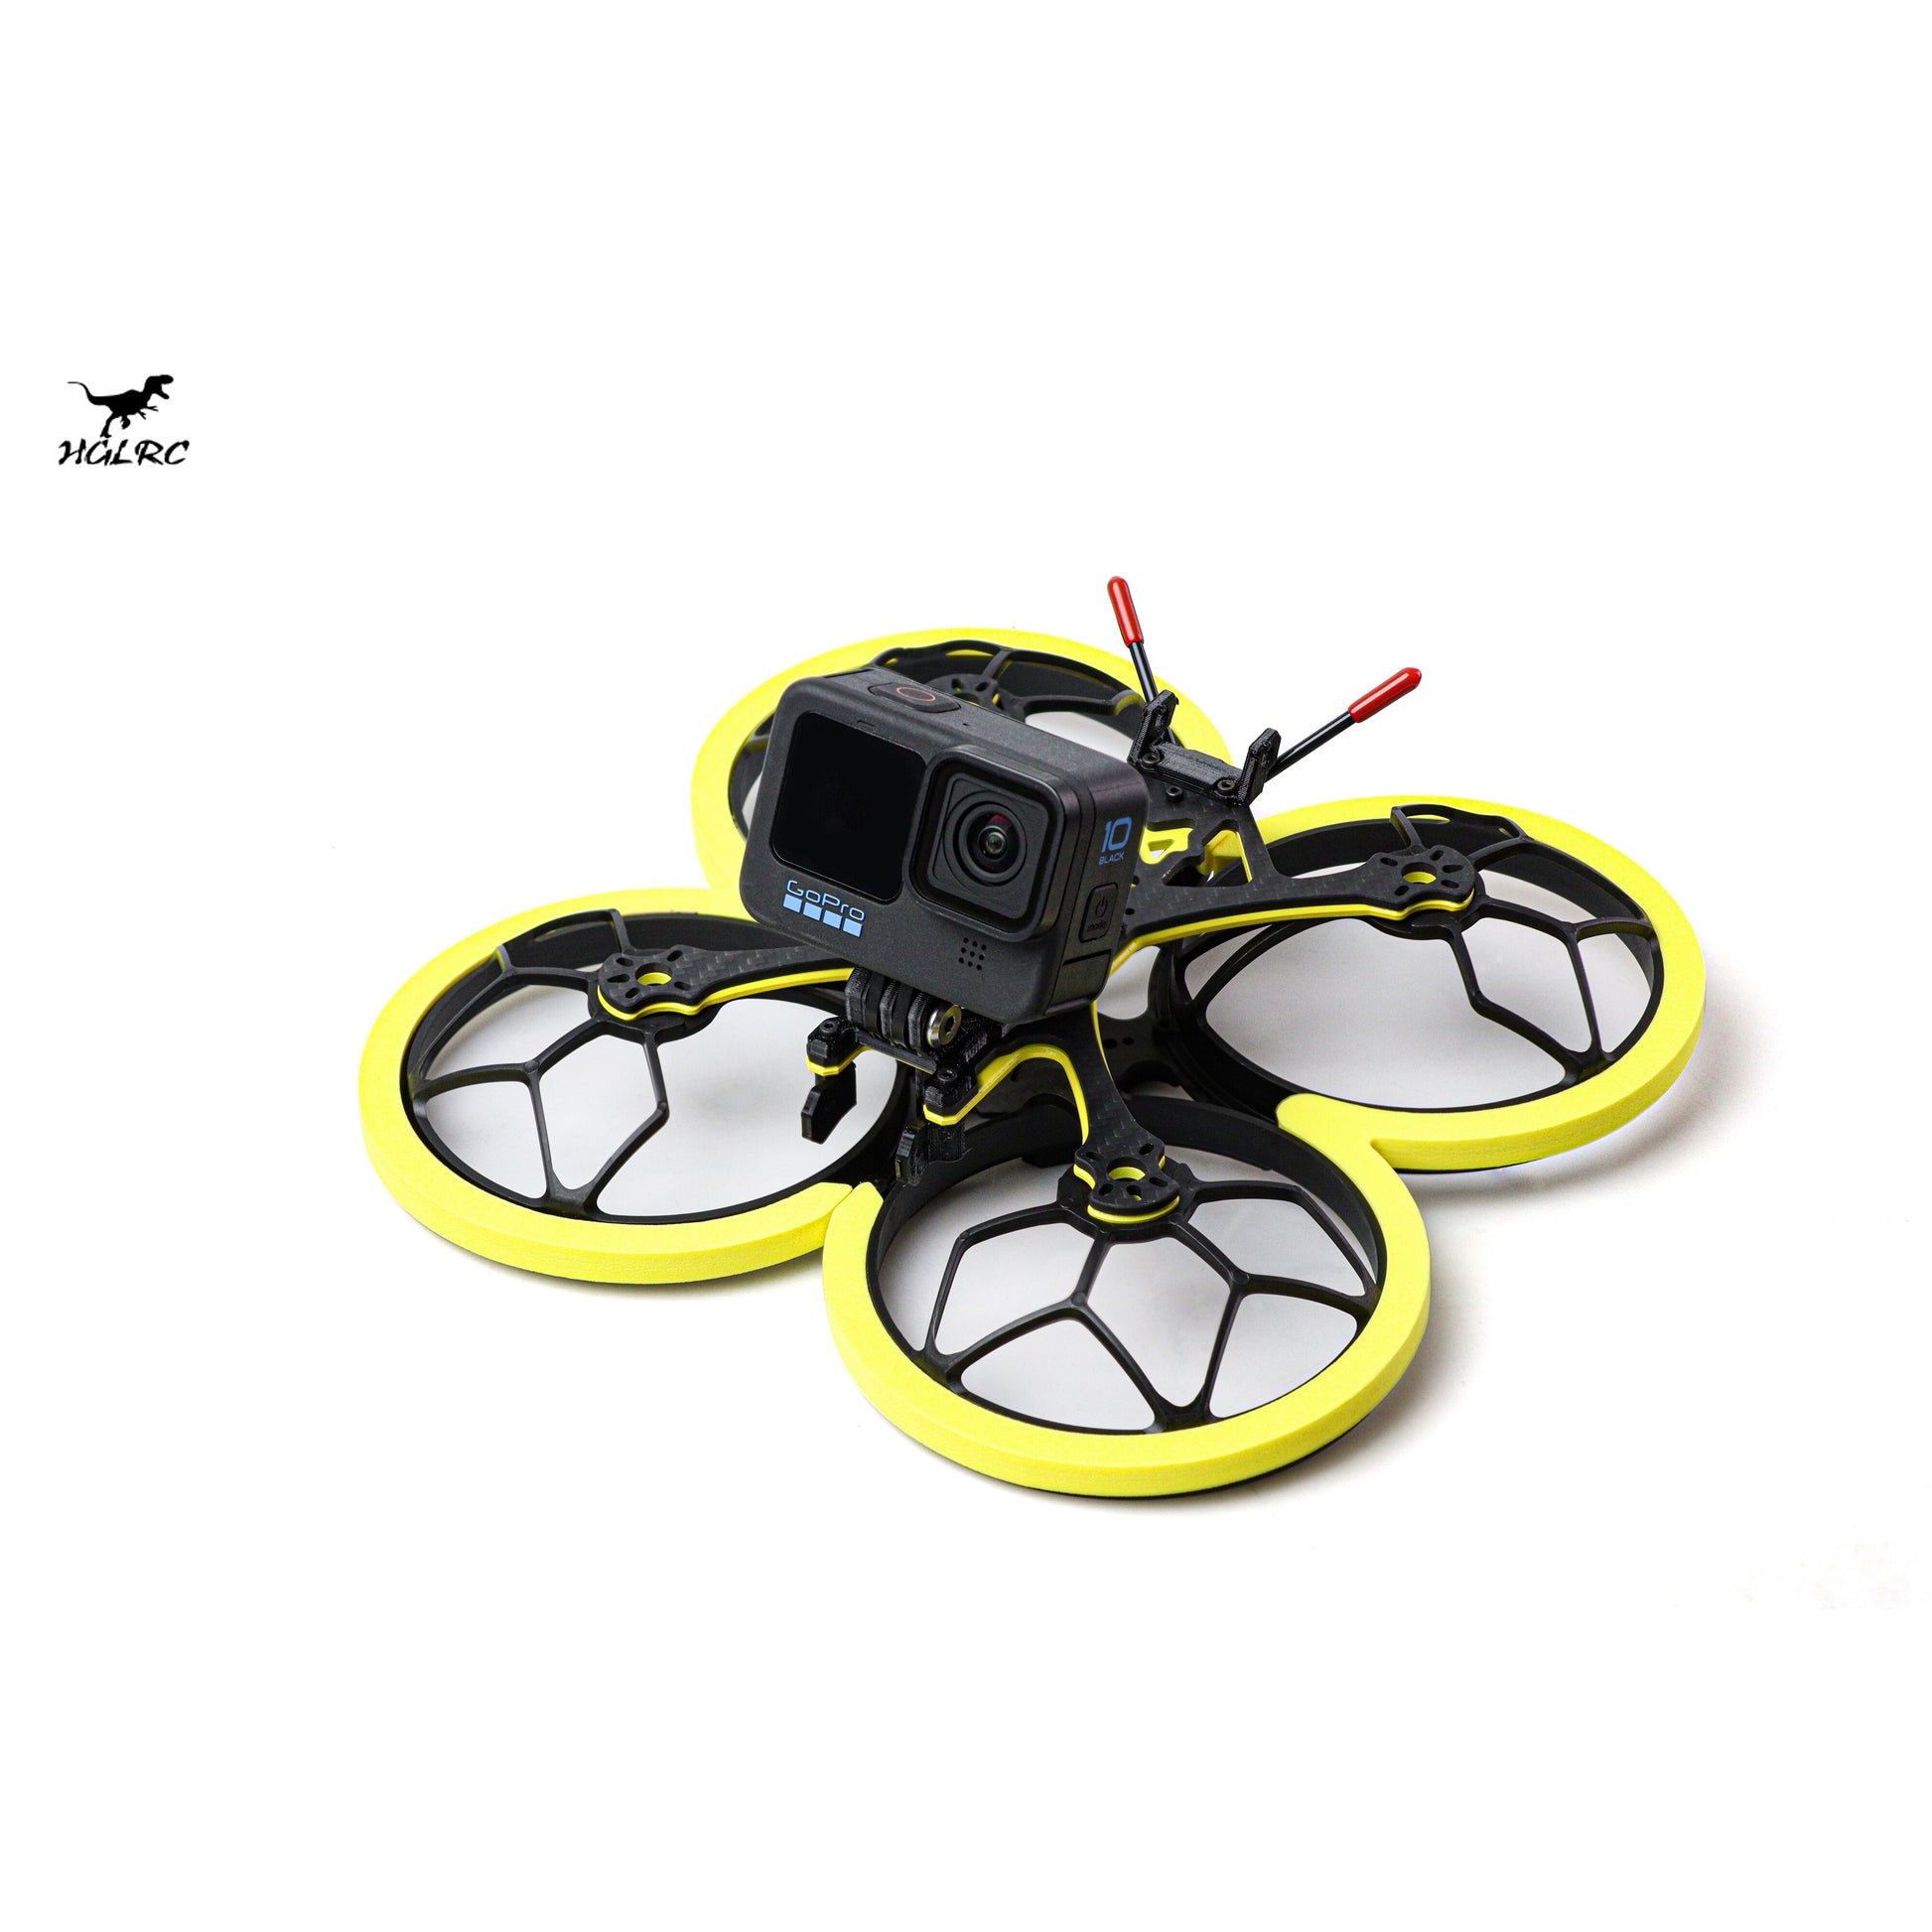 HGLRC Veyron35CR - 3.5 Inches Pusher Cinewhoop Frame Suitable For DIY RC FPV Quadcopter Freestyle Fancy Flight Drone Parts